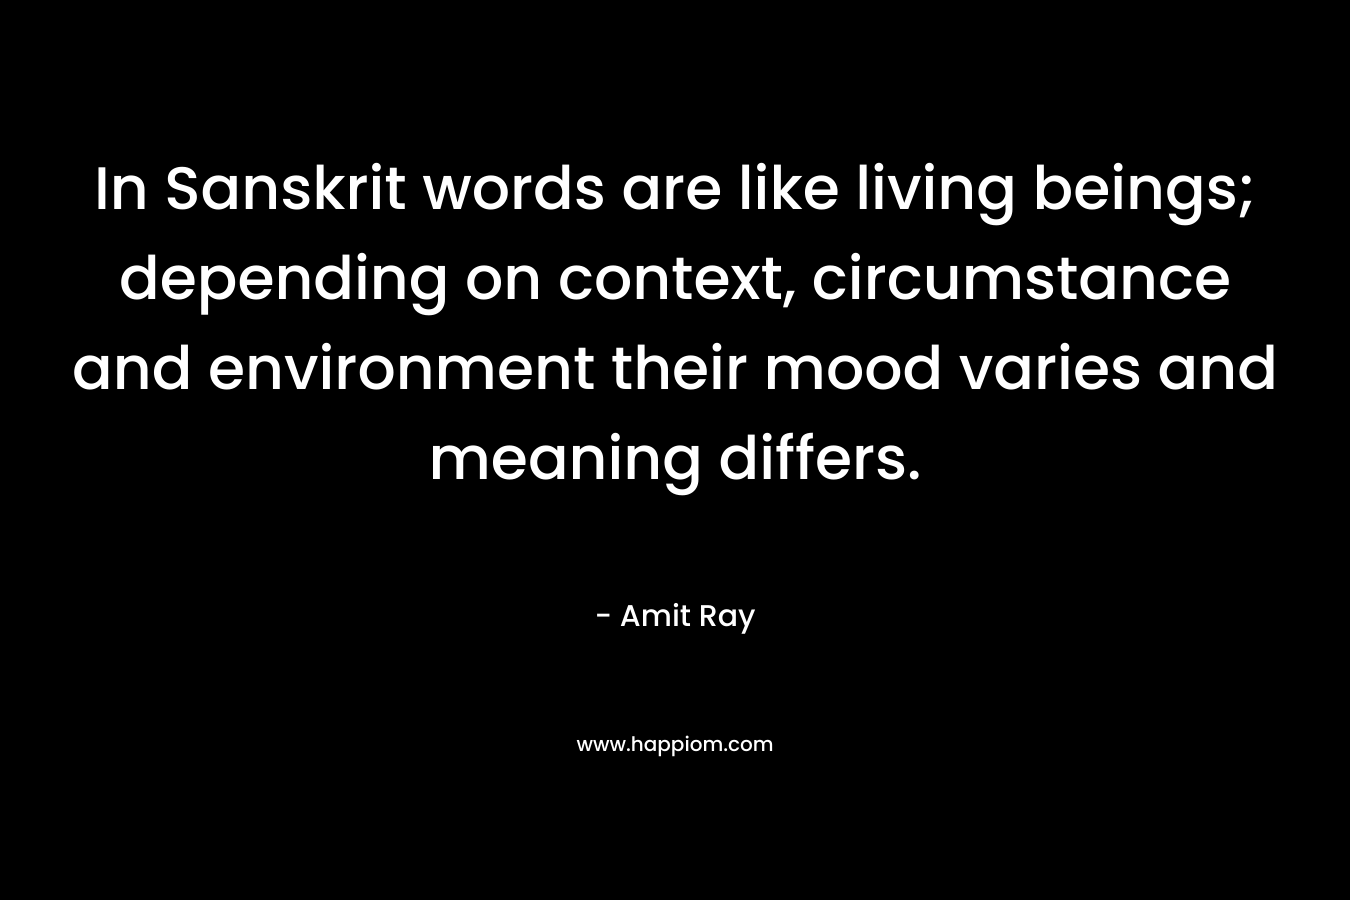 In Sanskrit words are like living beings; depending on context, circumstance and environment their mood varies and meaning differs. – Amit Ray